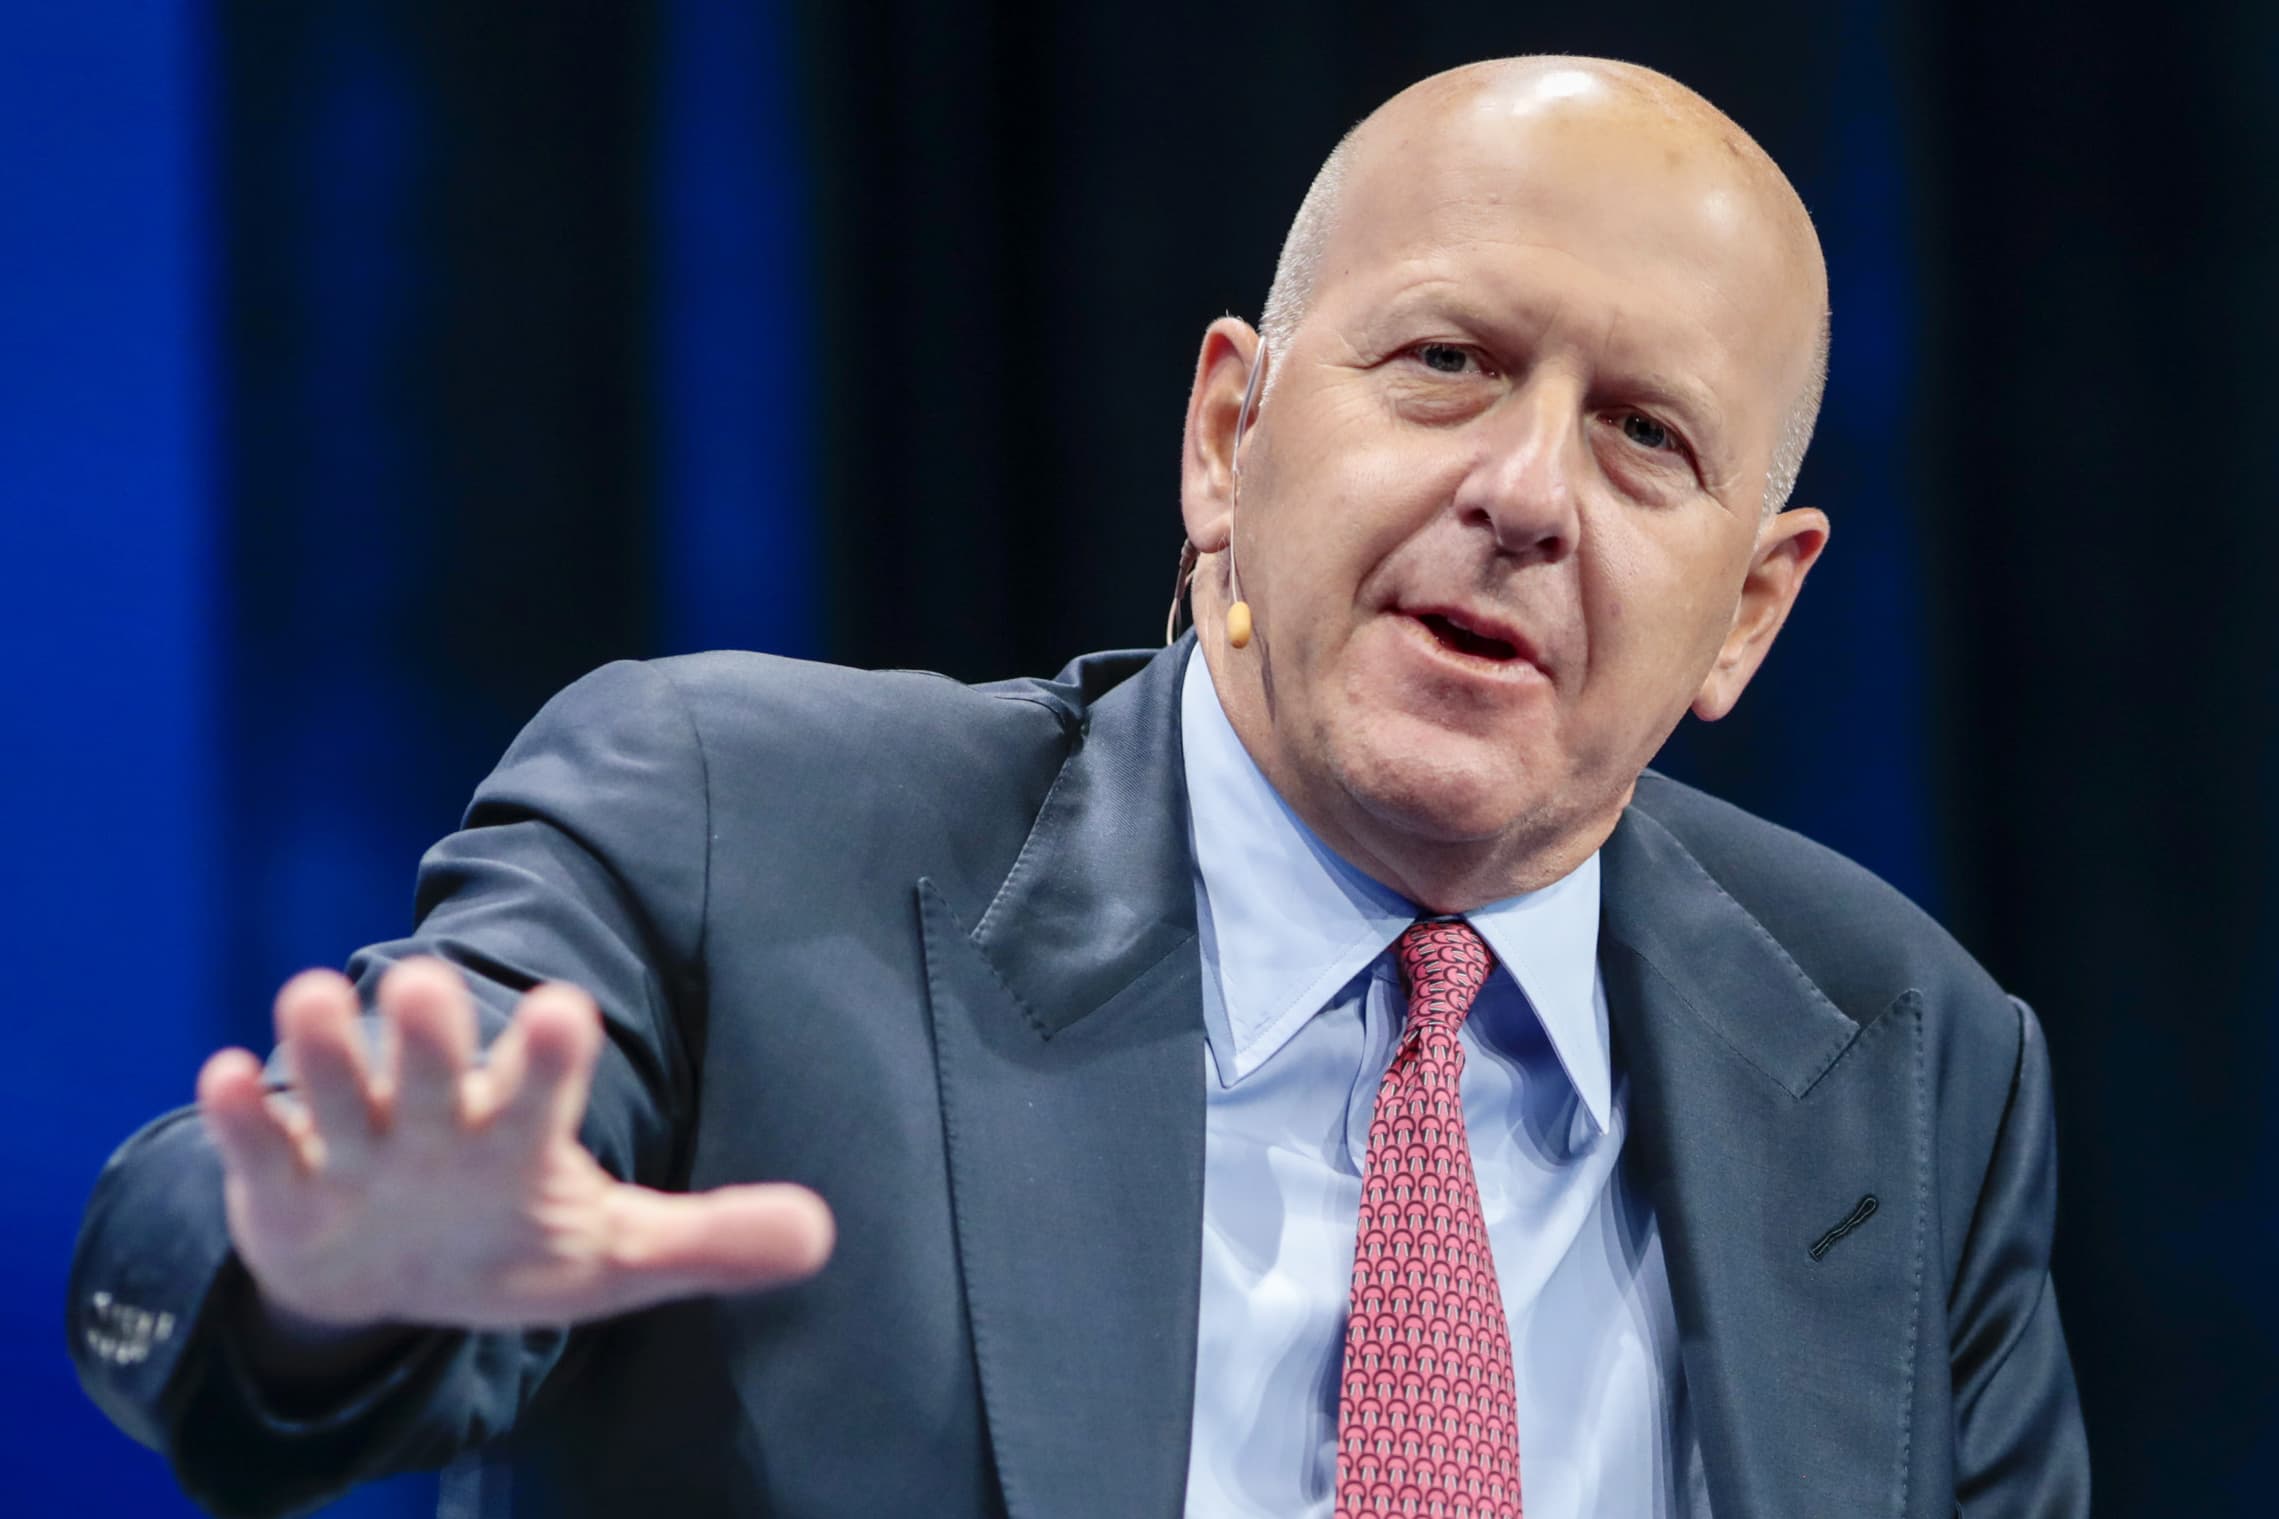 Solomon, CEO of Goldman Sachs, considers work from home to be an “aberration”